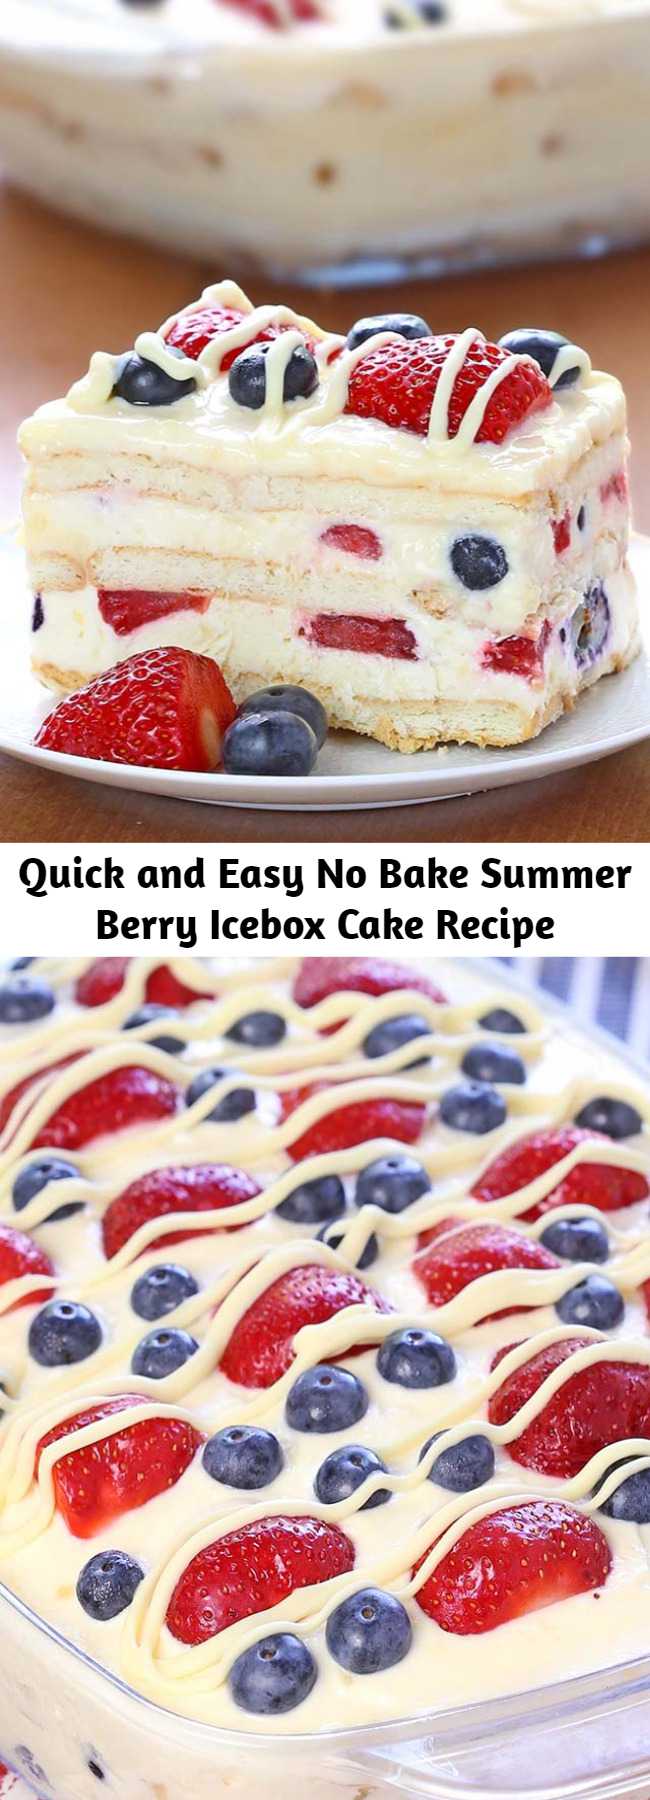 Quick and Easy No Bake Summer Berry Icebox Cake Recipe - Looking for a quick and easy Summer dessert recipe? Try out delicious No Bake Summer Berry Icebox Cake! There’s very little preparation involved in this recipe, which makes it great for hot summer days or for crazy busy days. You can throw it together whenever you have time (even the day before is fine) and it will be ready and waiting for you in the refrigerator when you want a sweet treat!